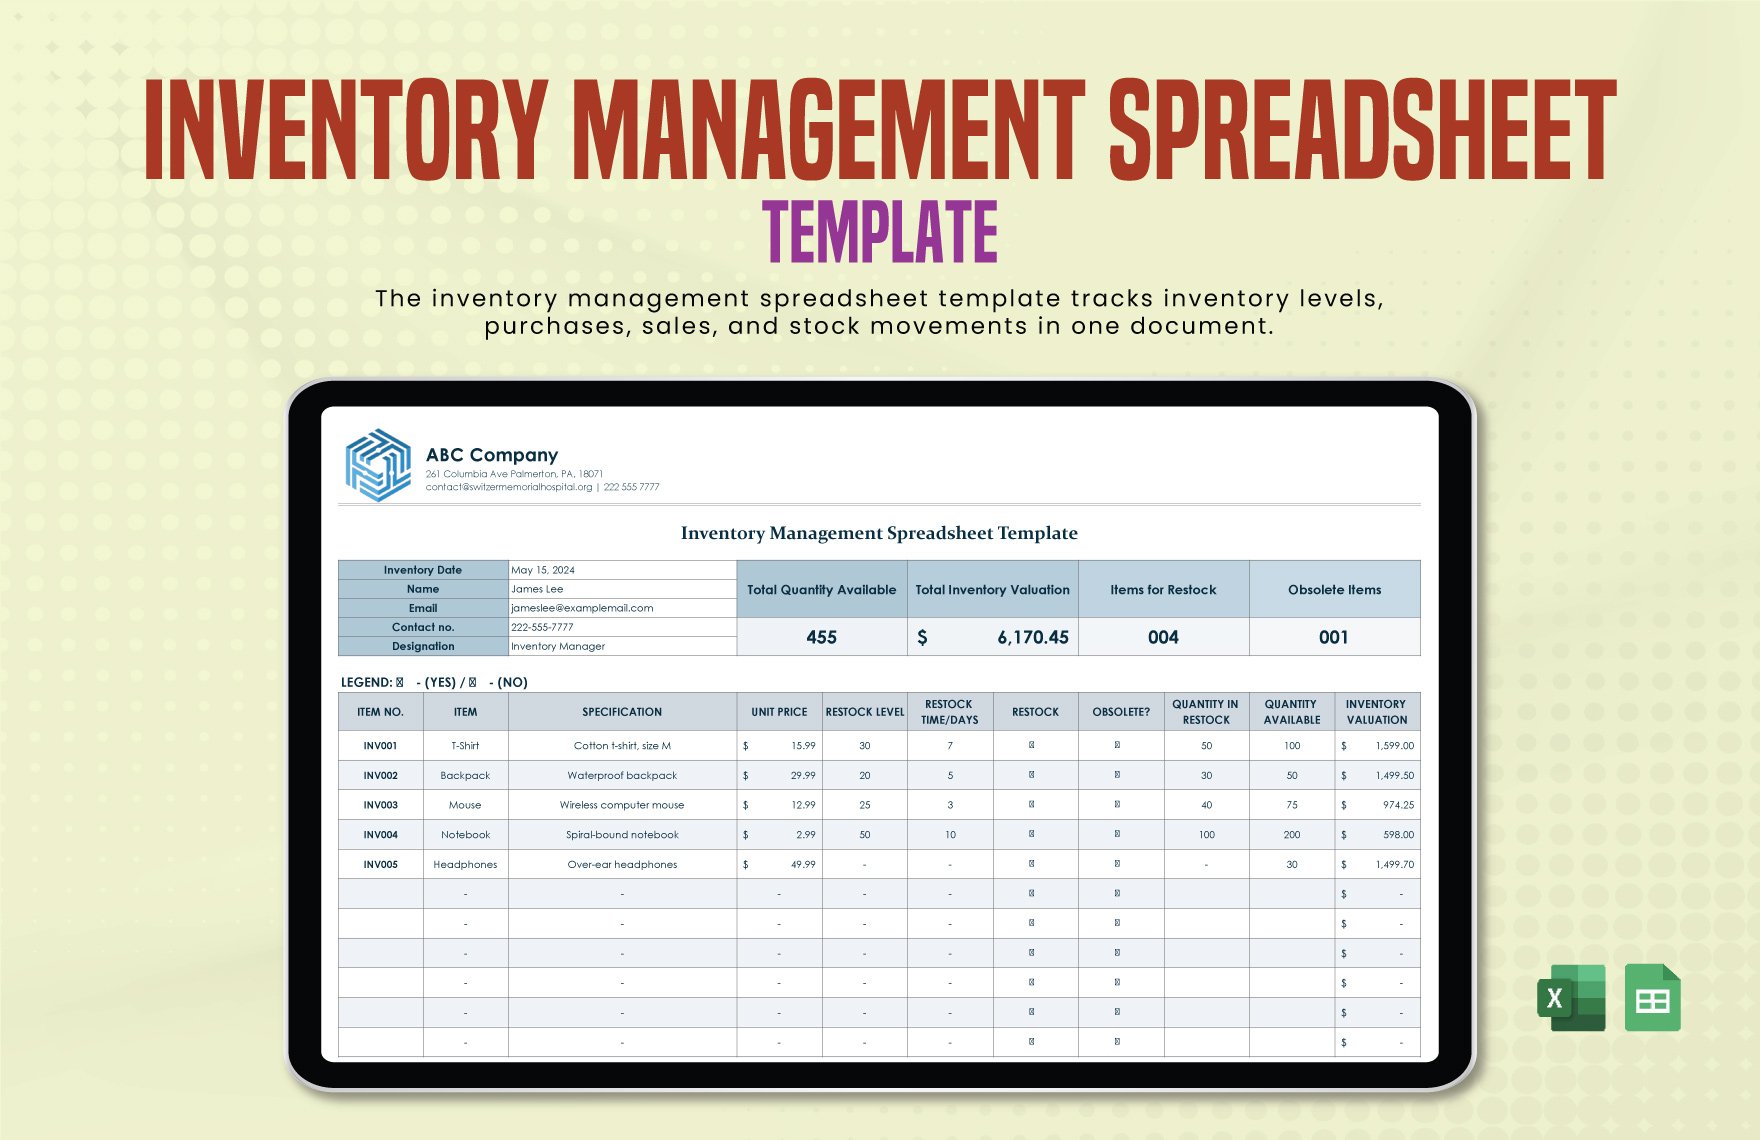 Inventory Management Spreadsheet Template in Excel, Google Sheets